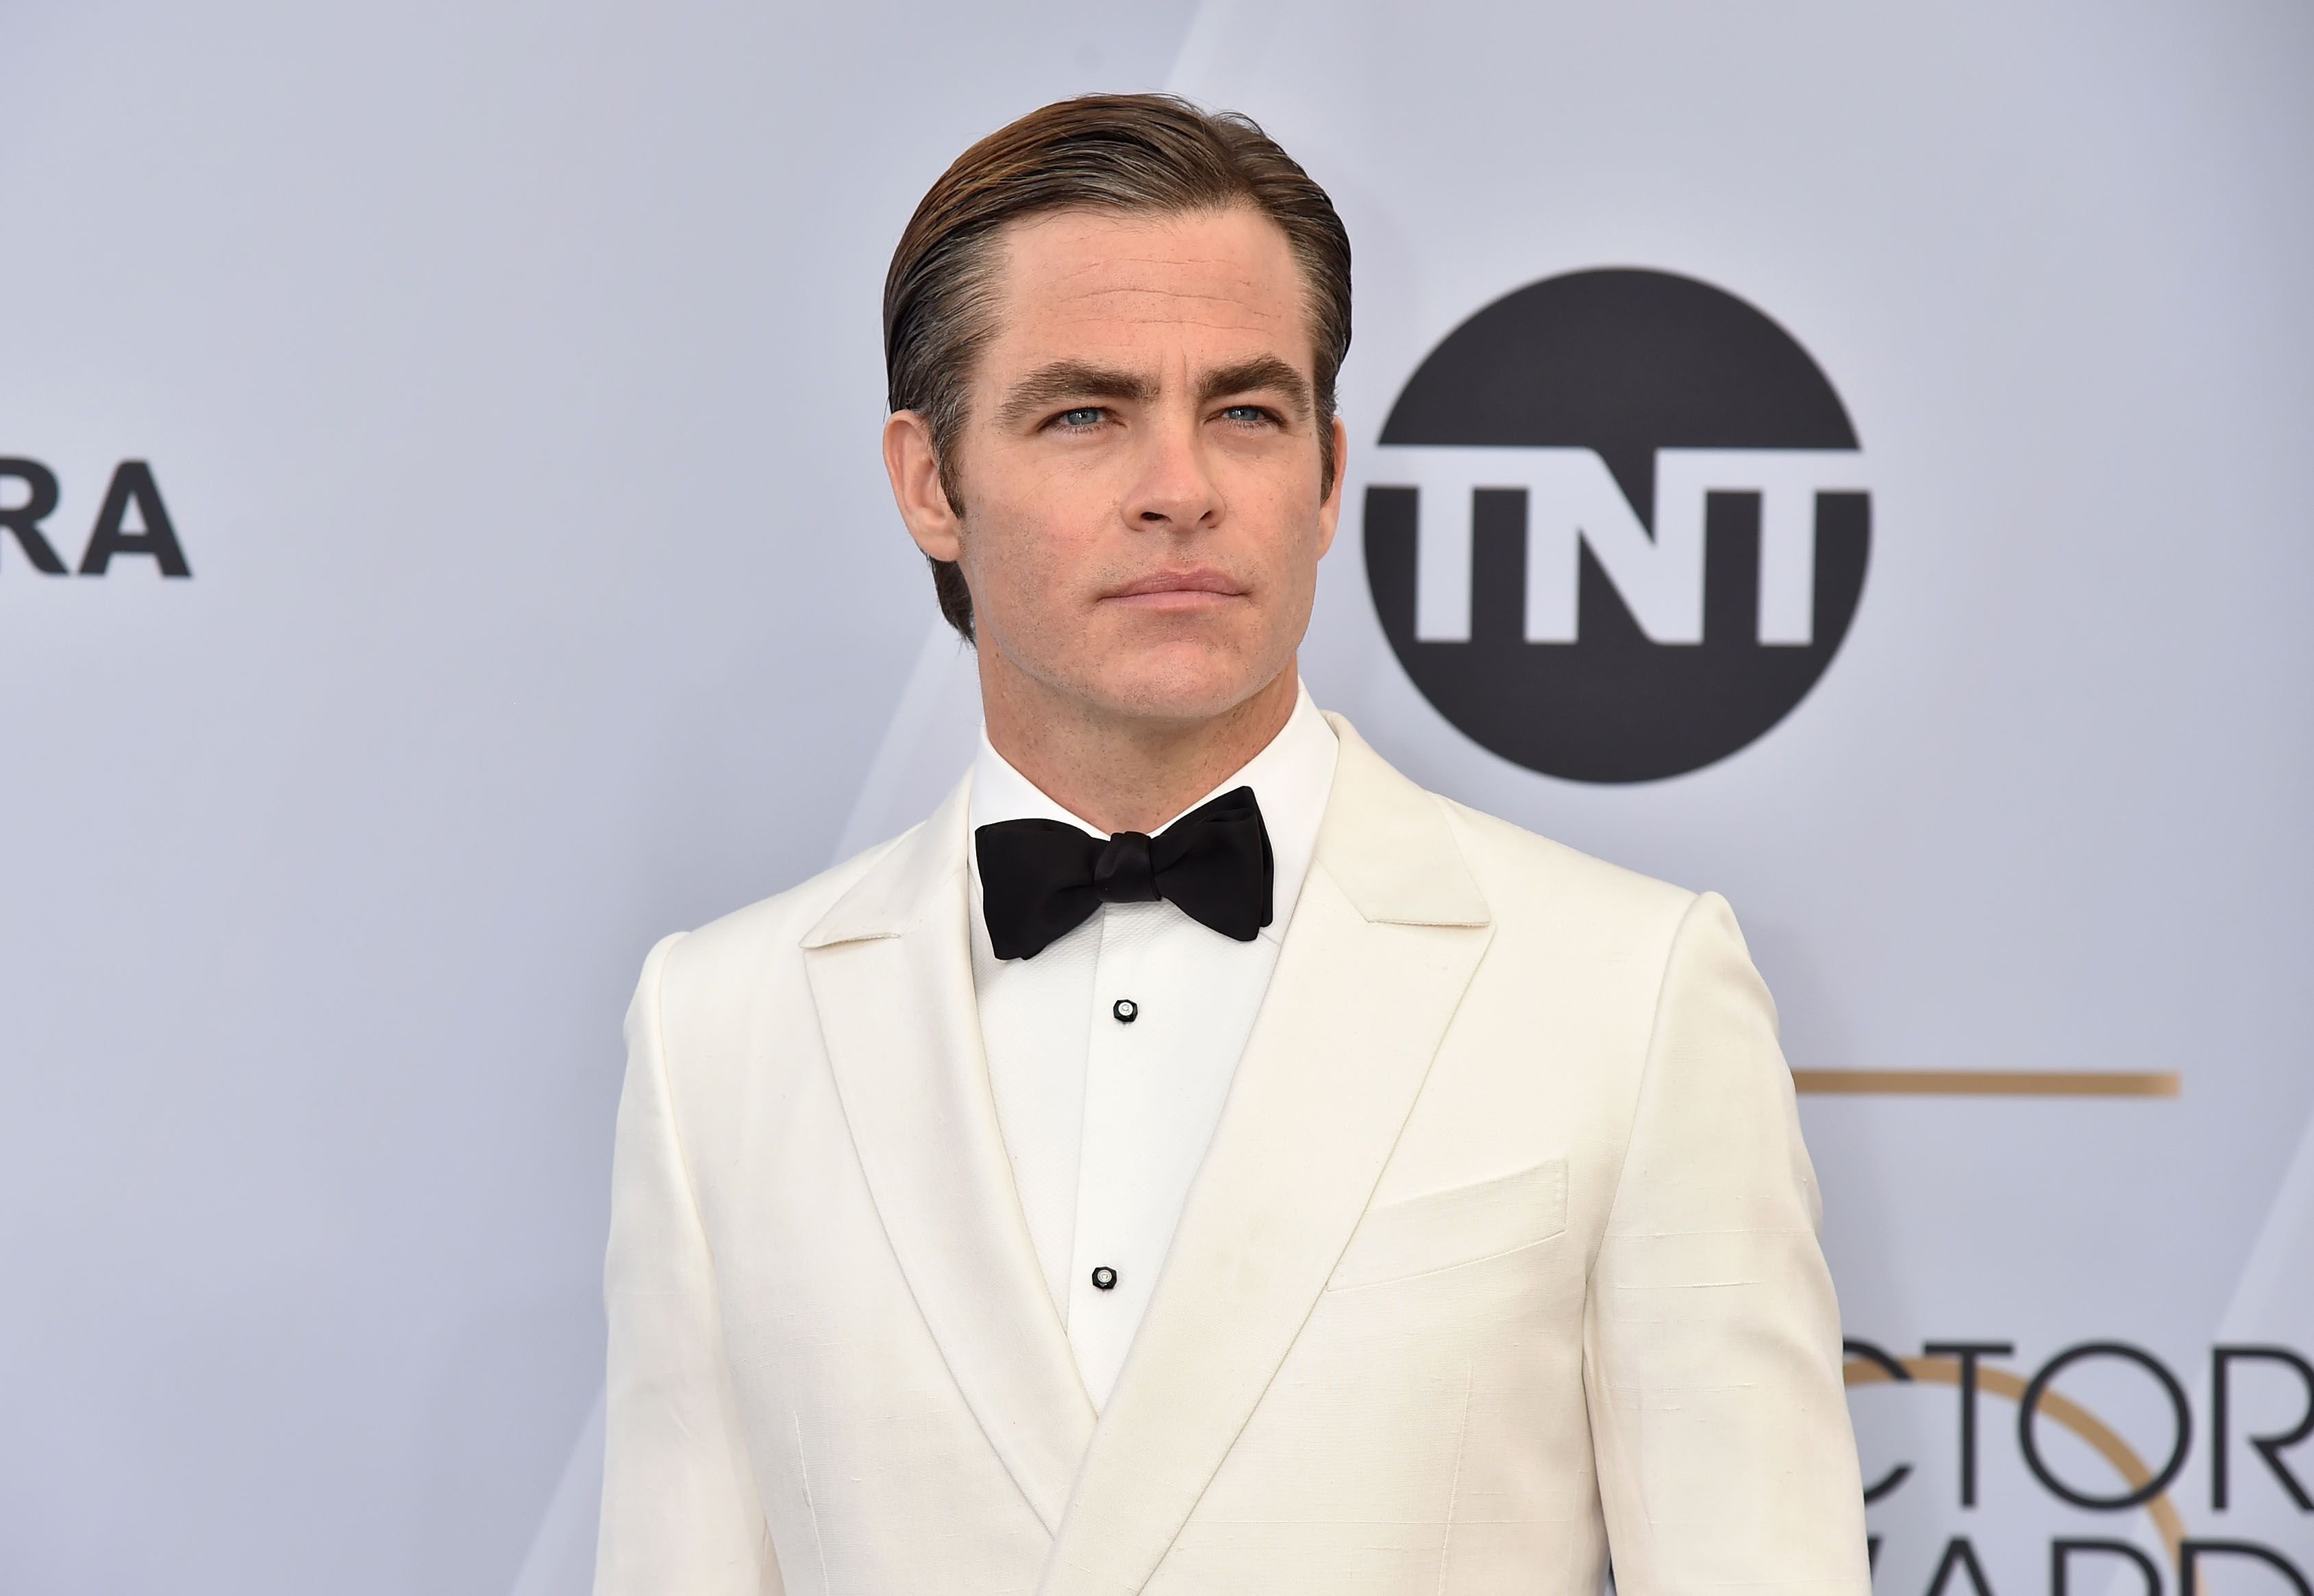 Chris Pine during the 25th Annual Screen Actors Guild Awards at the Shrine Auditorium on January 27, 2019 in Los Angeles, California.  |  Source: Getty Images